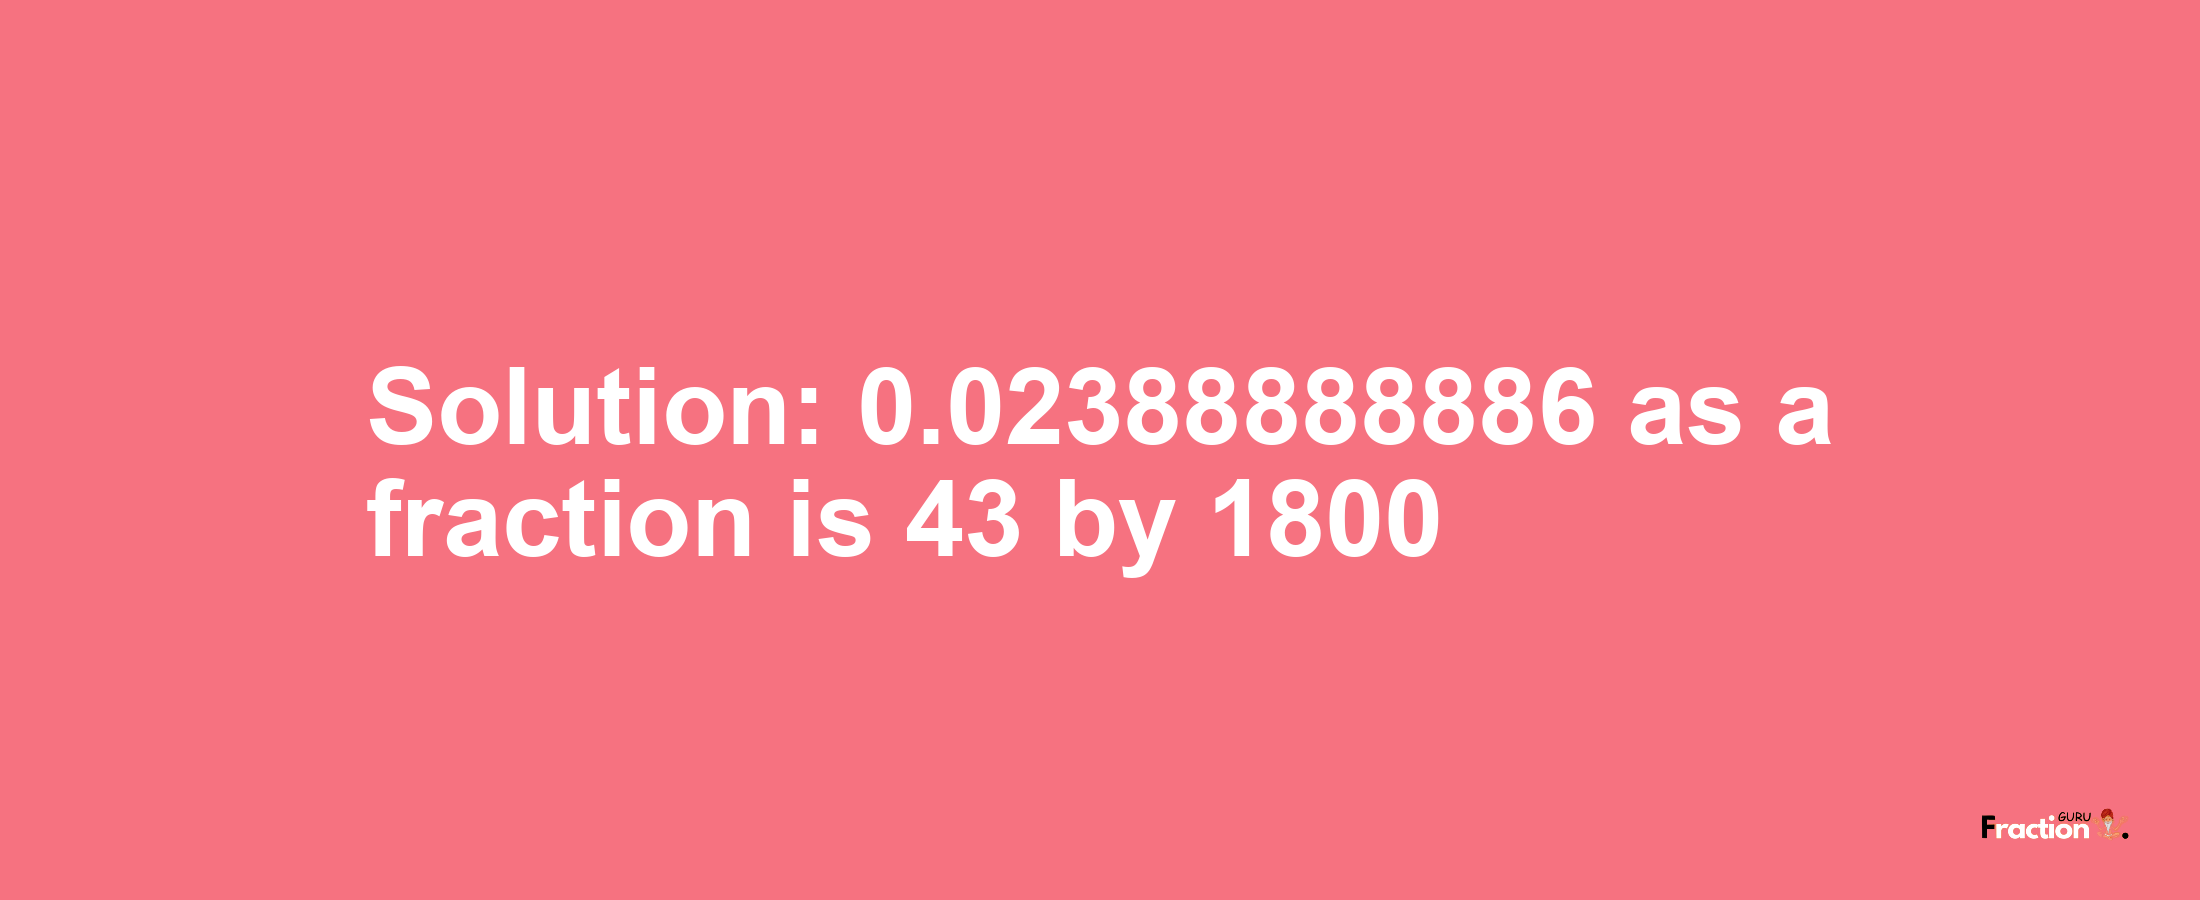 Solution:0.02388888886 as a fraction is 43/1800